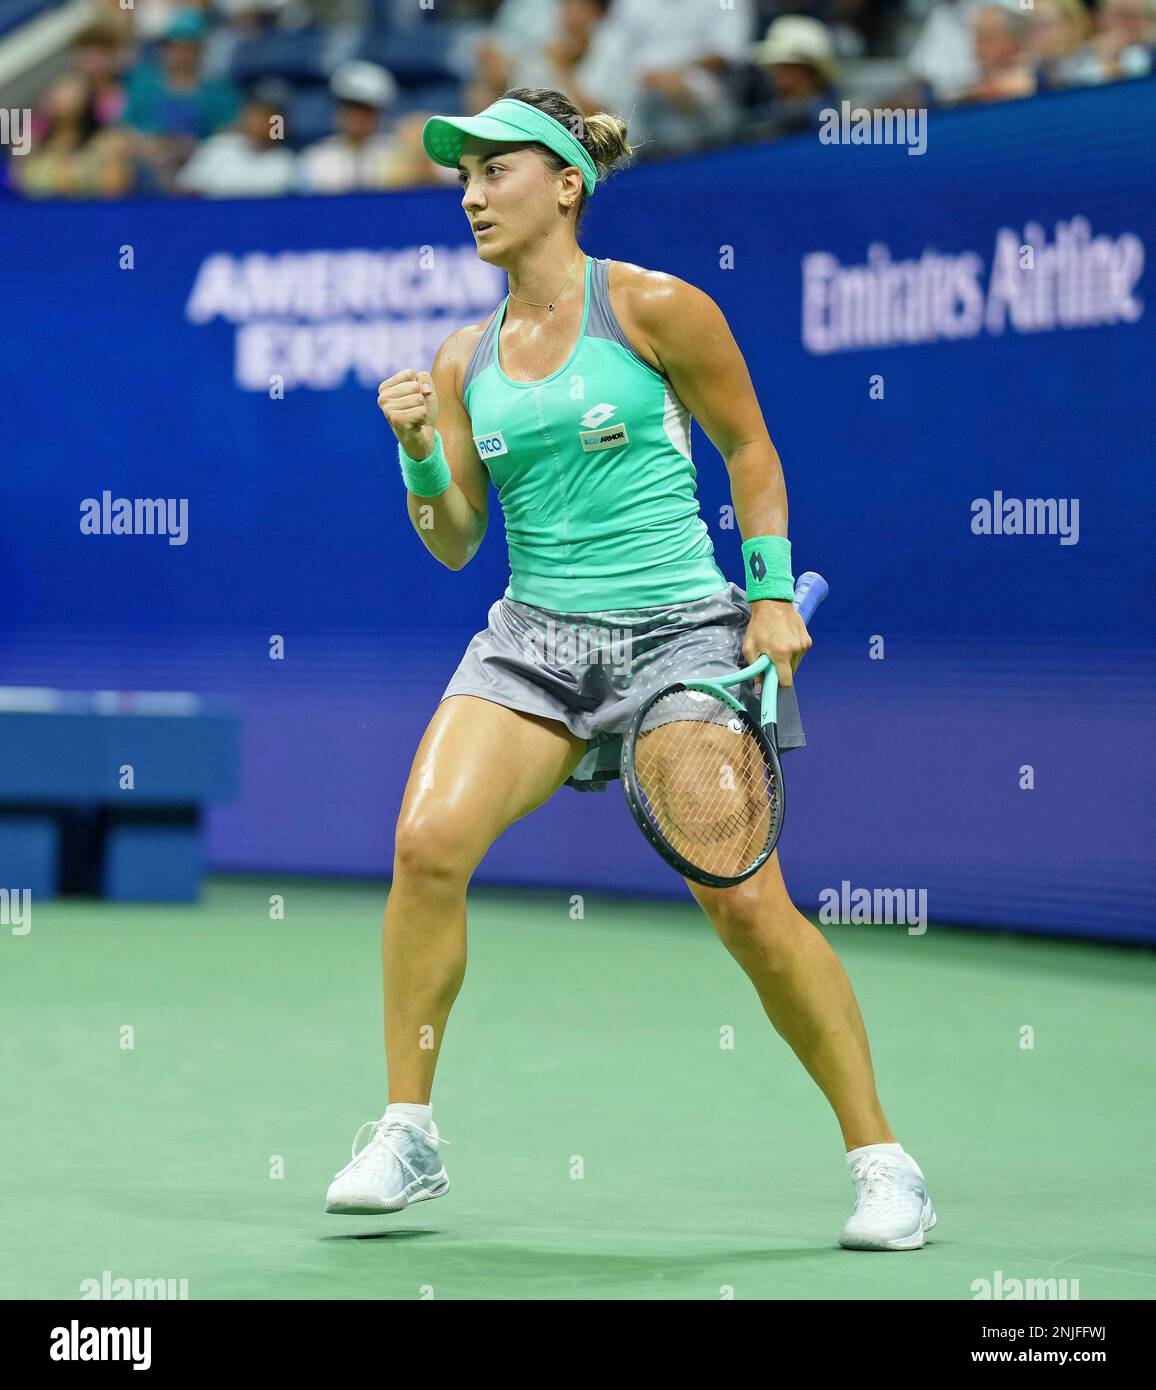 Danka Kovinic reacts during a womens singles match at the 2022 US Open, Monday, Aug